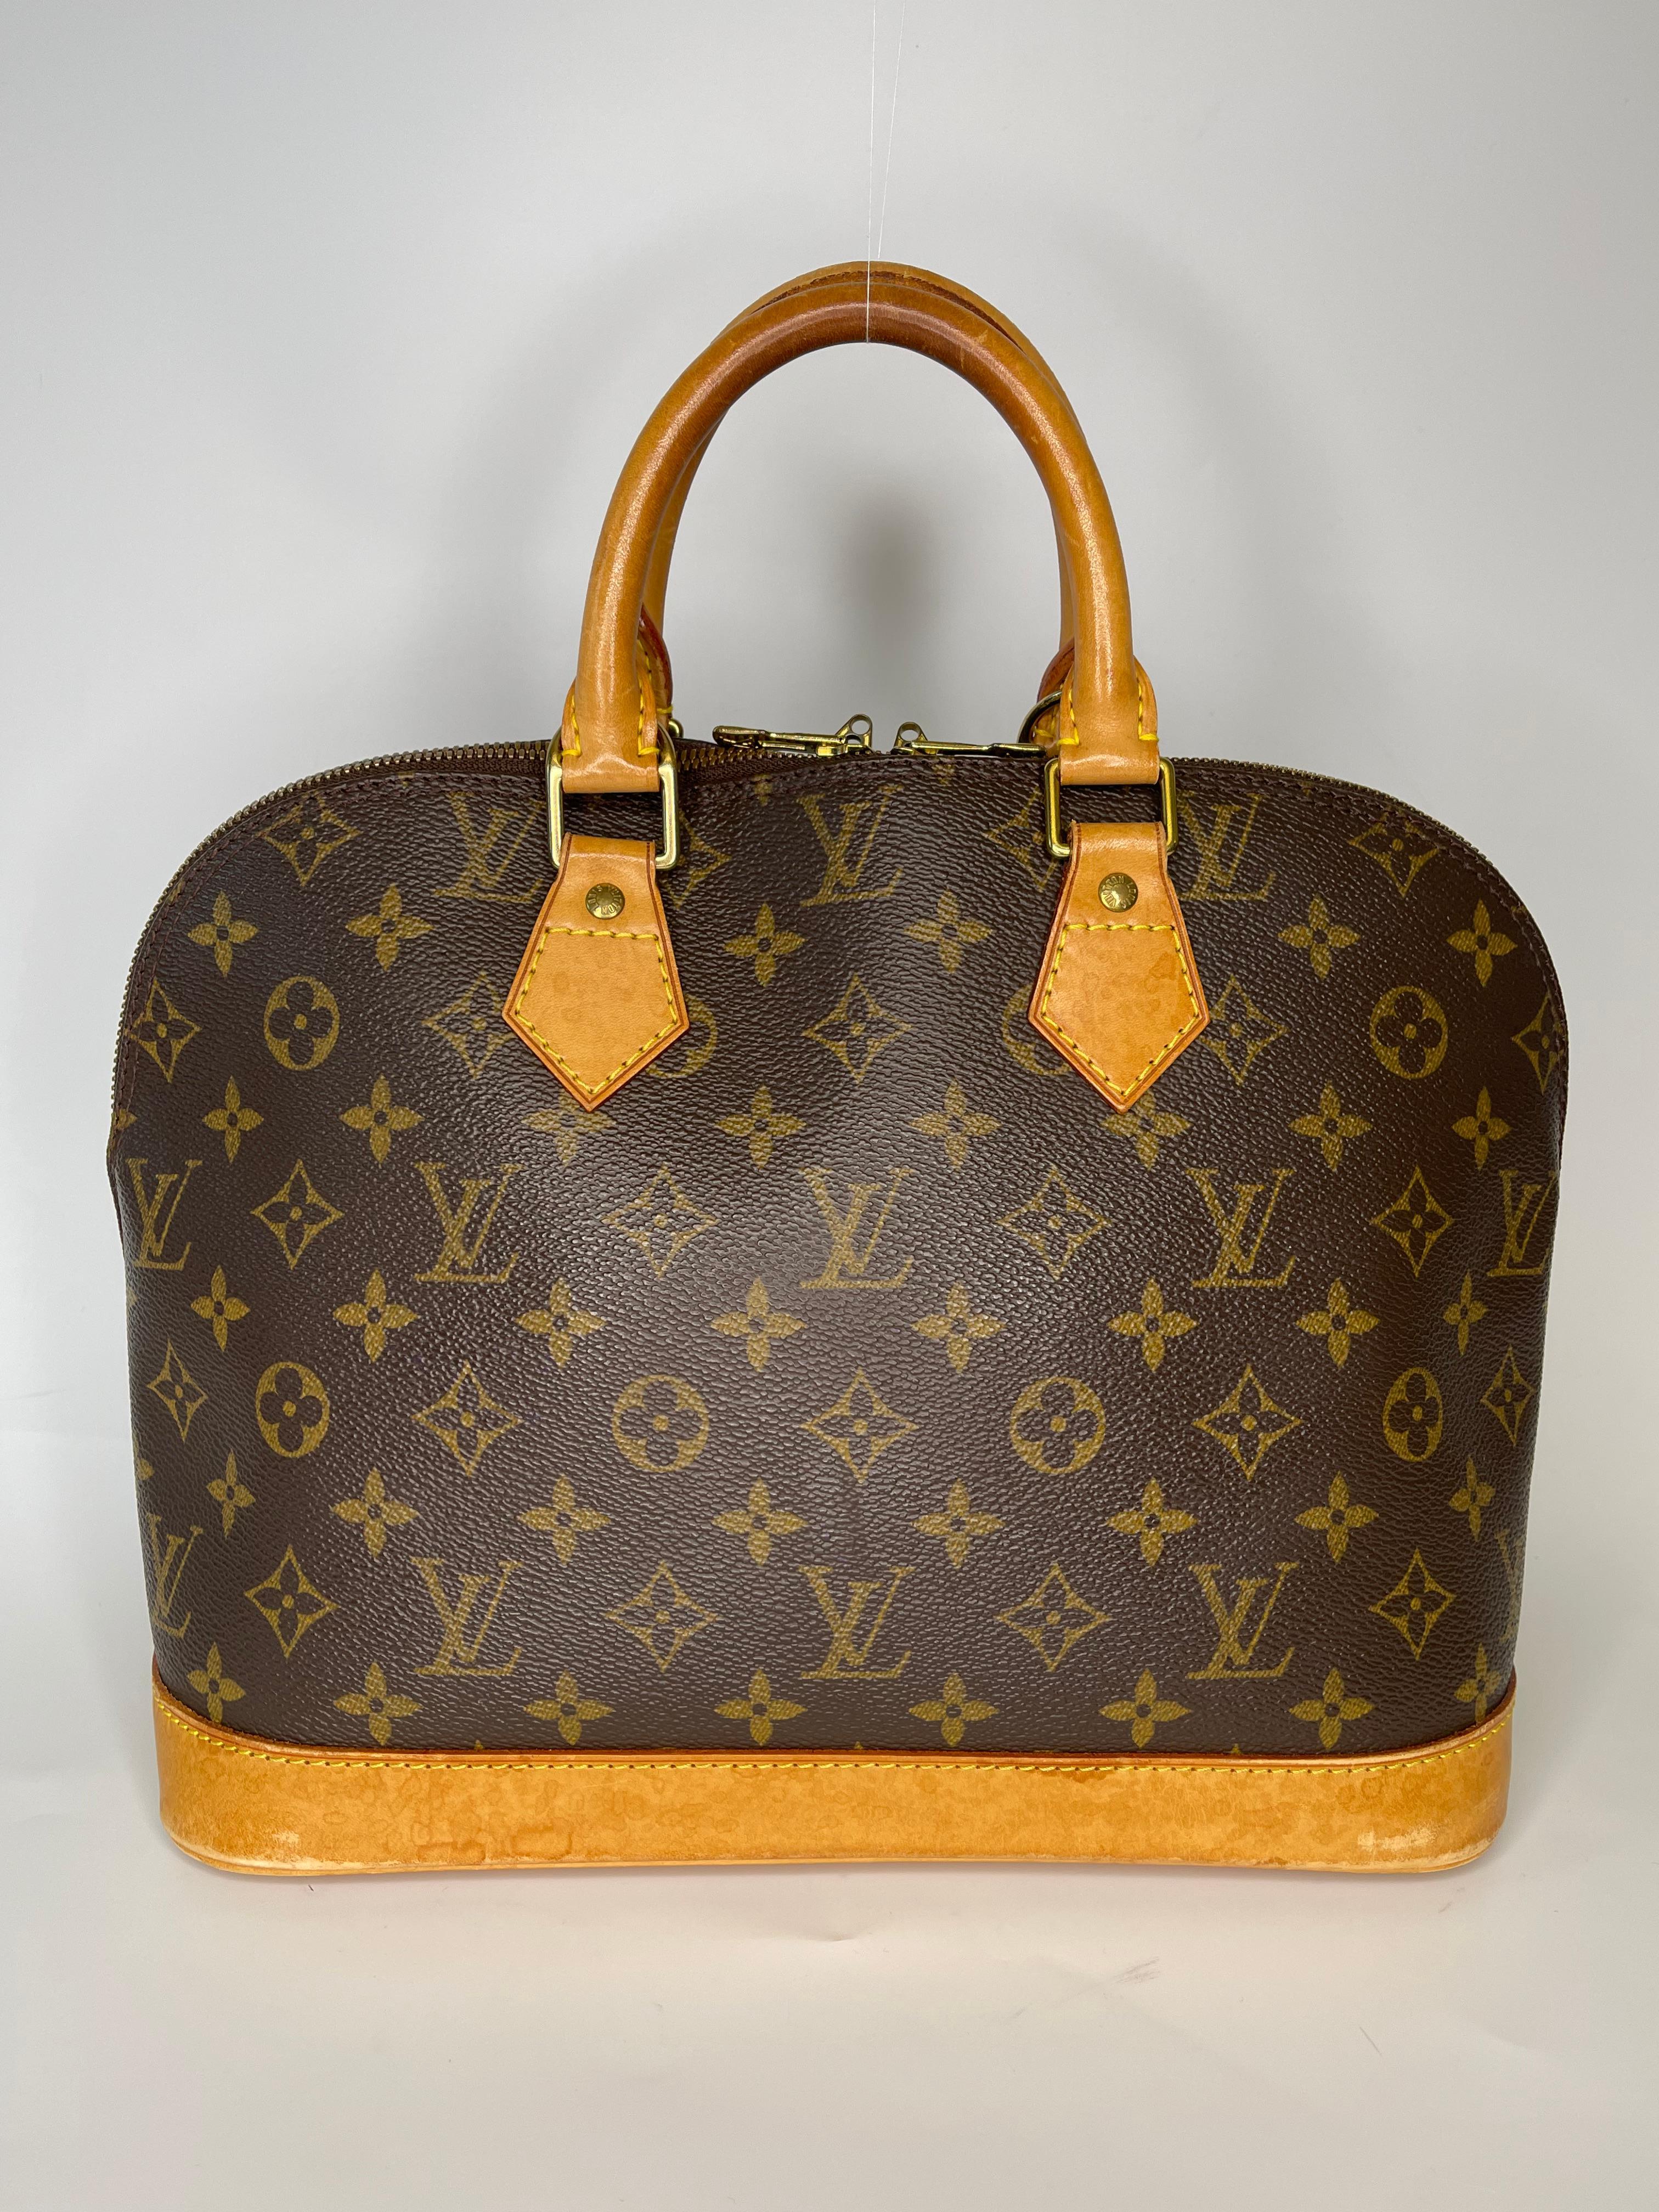 This classic Louis Vuitton bag is an Alma made with brown coated canvas and a gorgeous vechetta leather handles and trim. Features iconic LV zippers and brass hardware, dual top handles, and one large top zipper opening to a beautiful interior, with